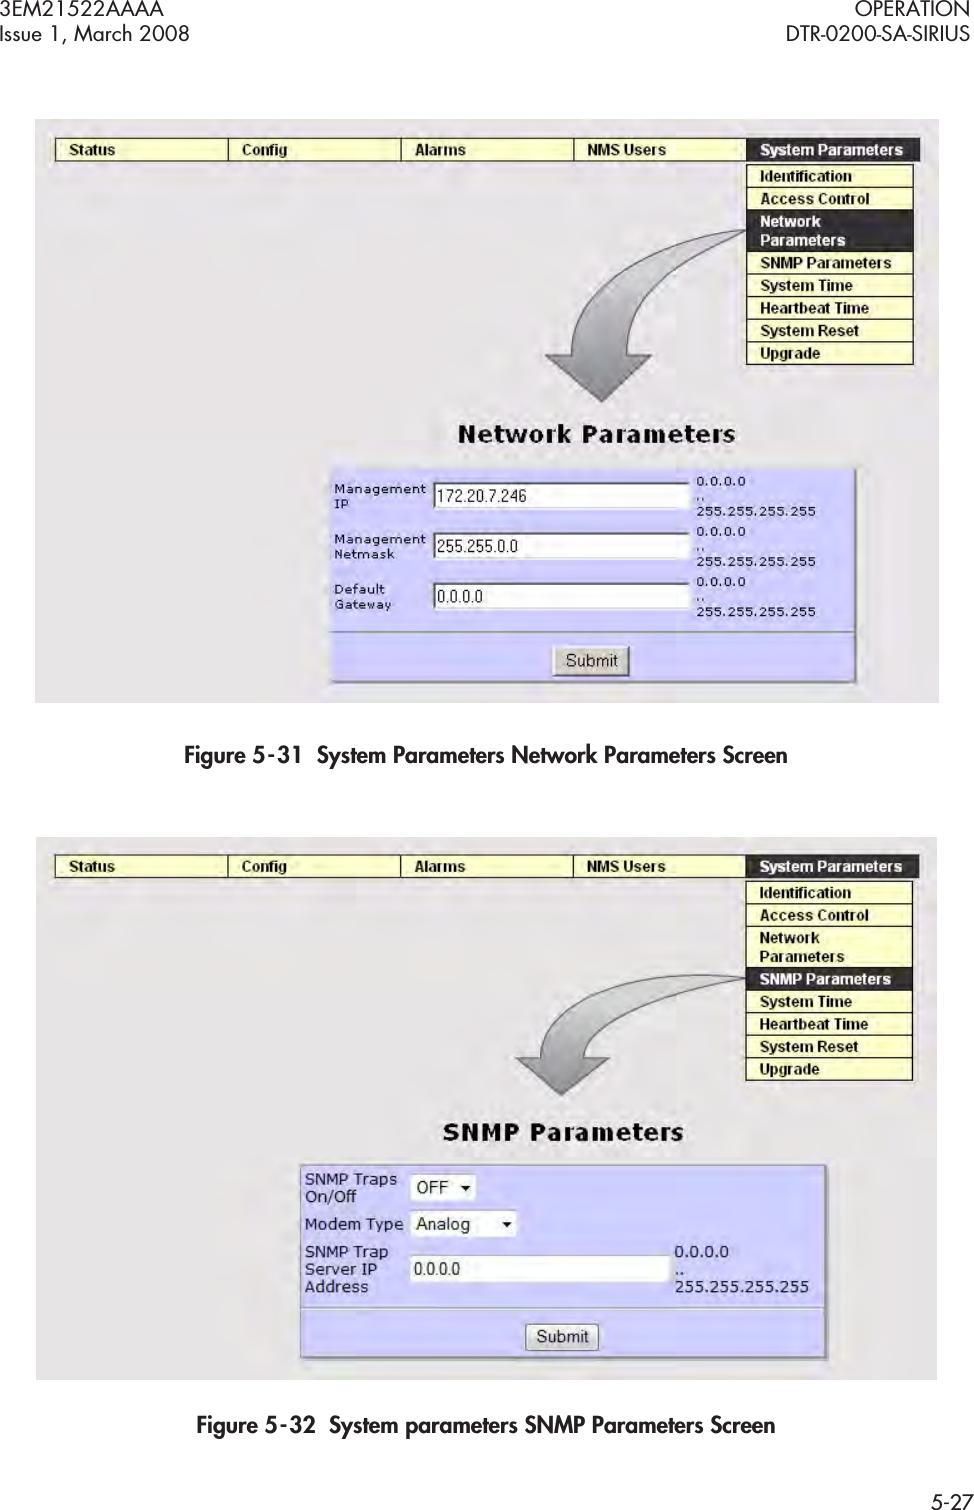 3EM21522AAAA OPERATIONIssue 1, March 2008 DTR-0200-SA-SIRIUS5-27Figure 5  -  31  System Parameters Network Parameters ScreenFigure 5  -  32  System parameters SNMP Parameters Screen